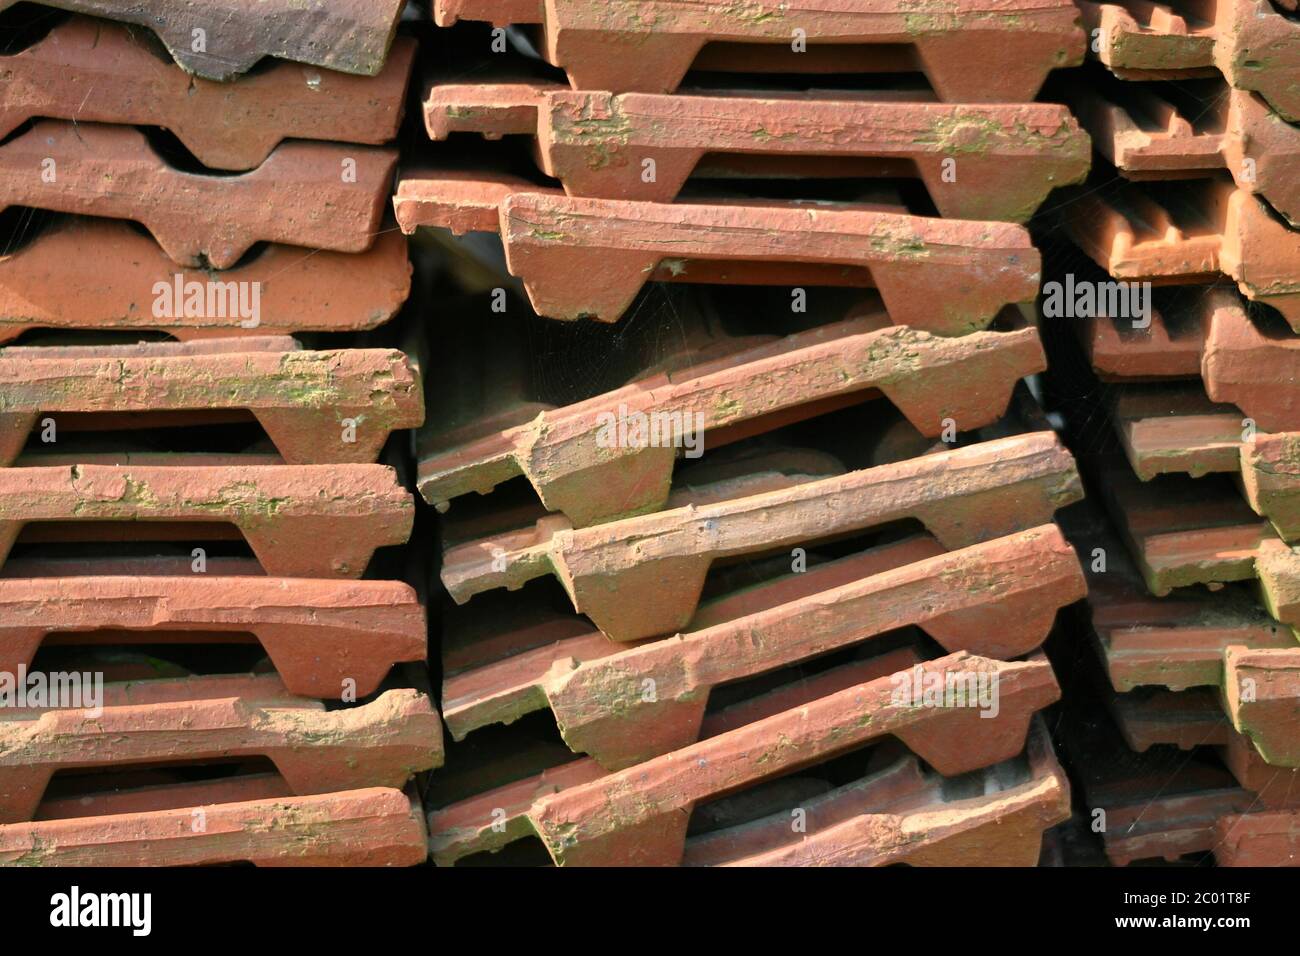 Roof tile stack Stock Photo